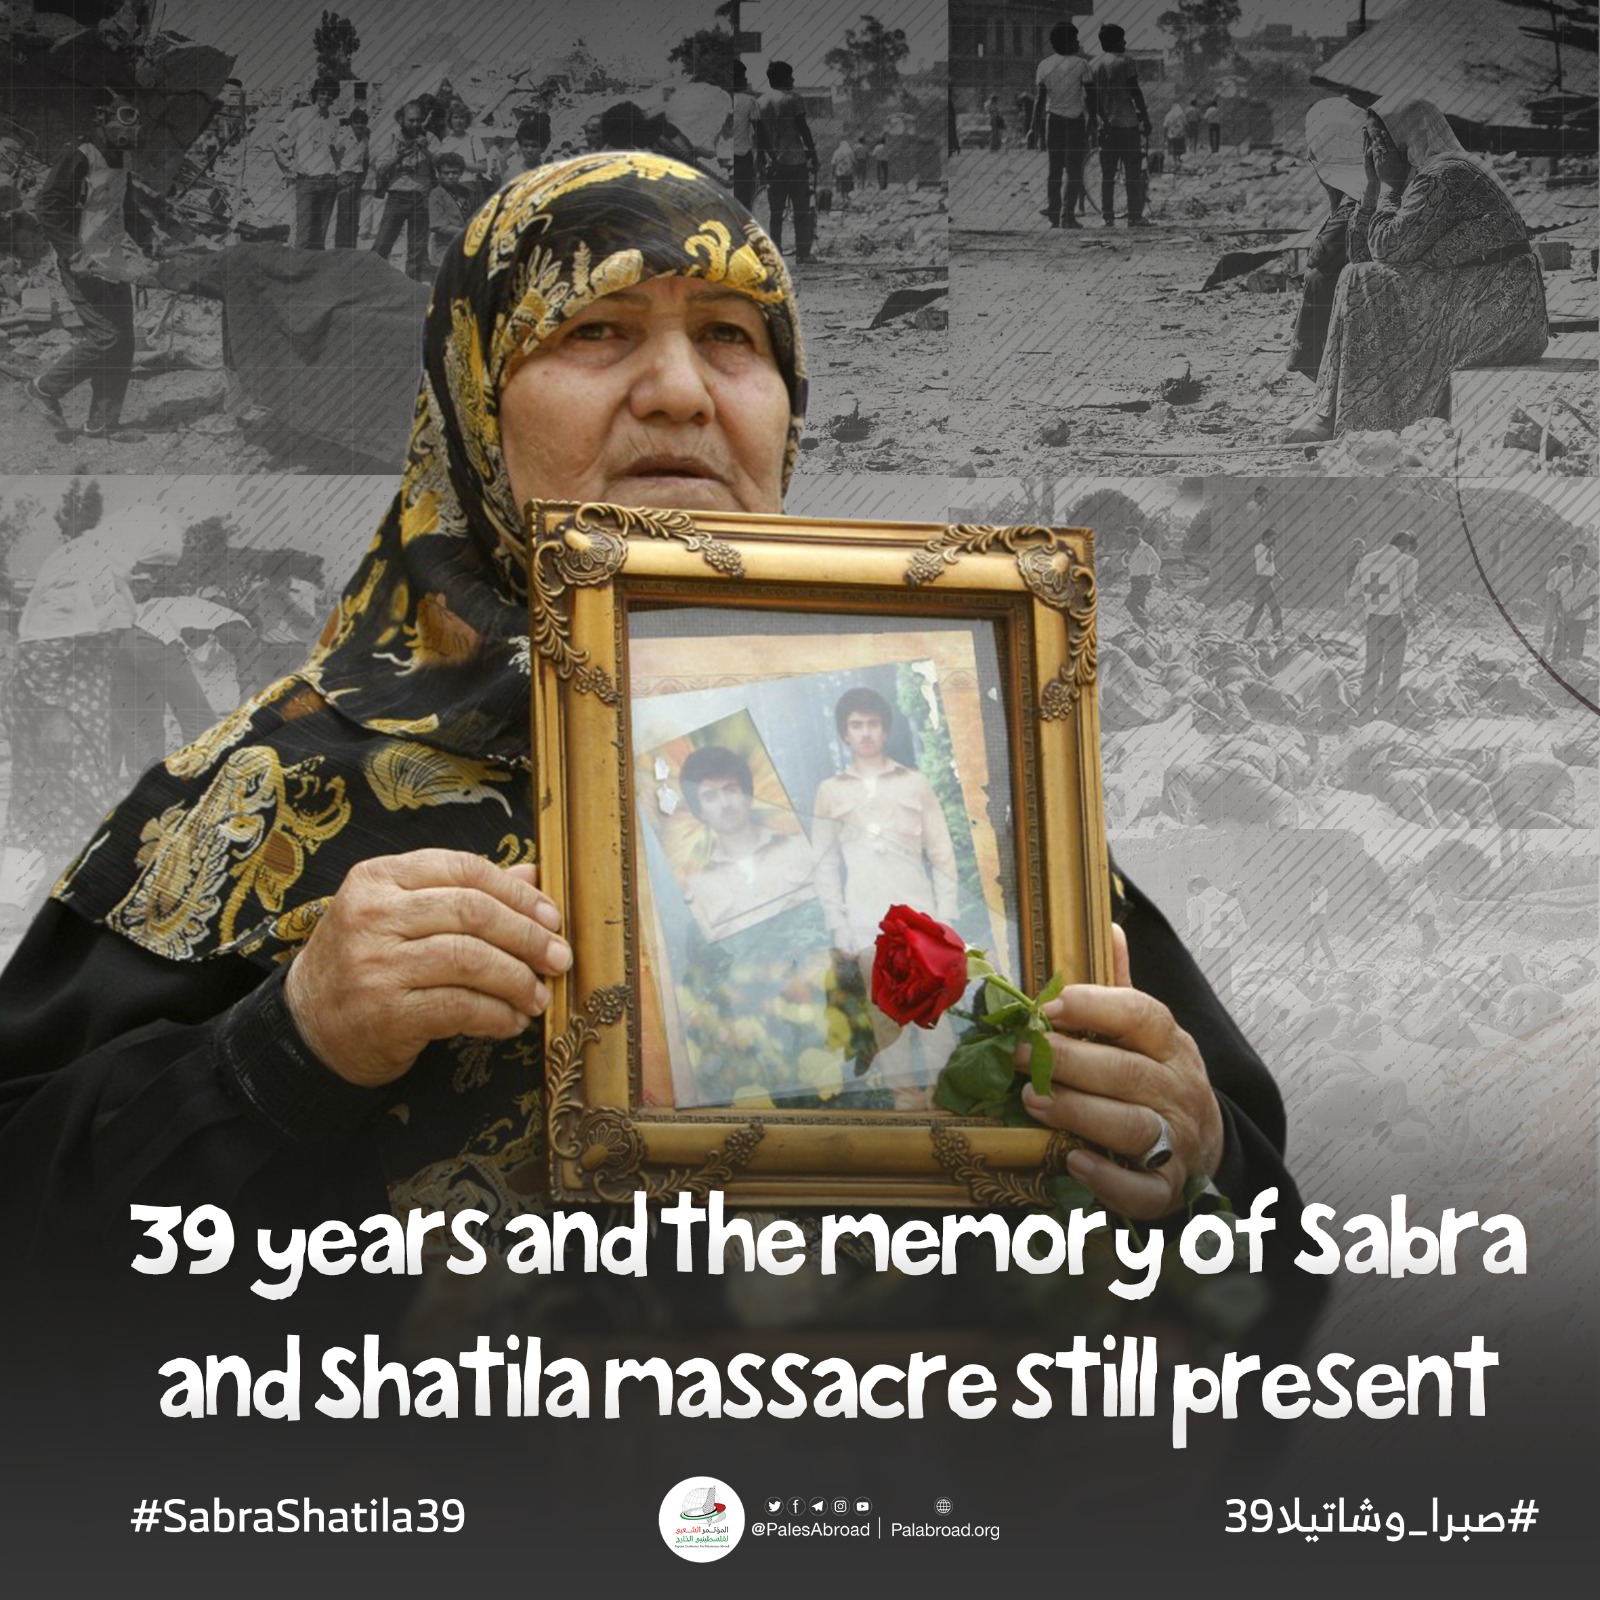 39 years and Sabra and Shatila massacre is still present